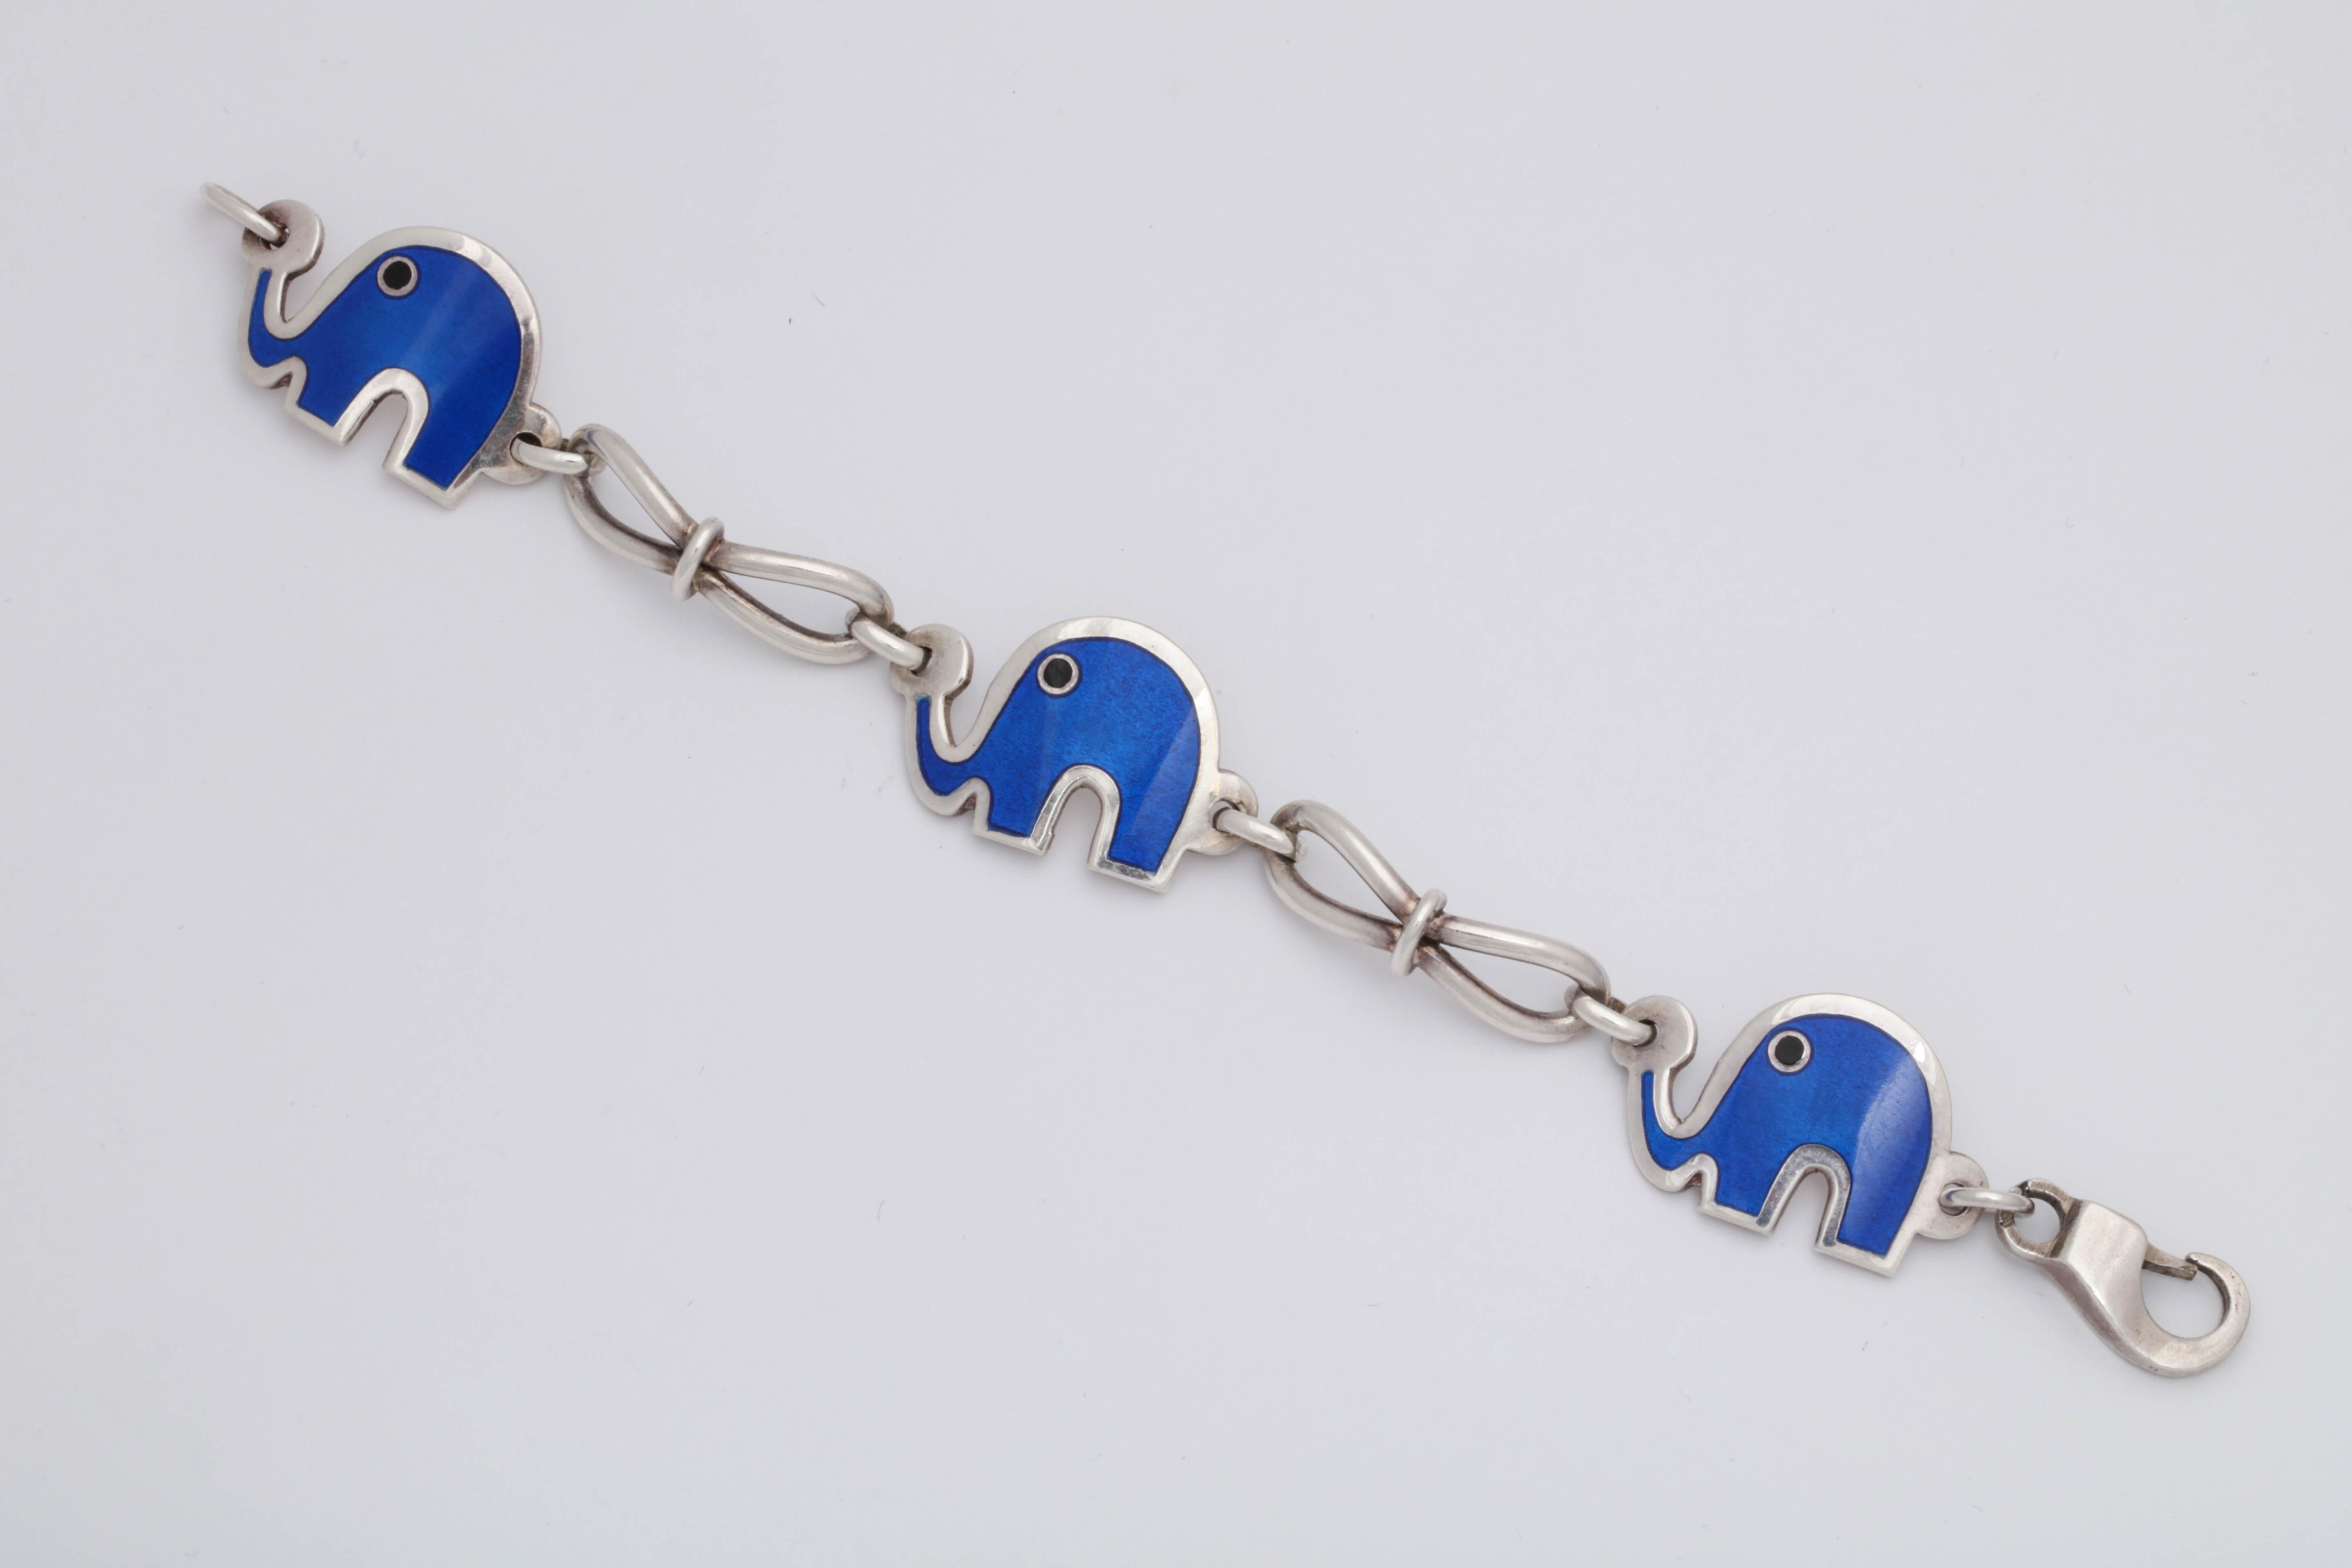 One Unisex Bracelet Designed With Three Figural And Whimisical Elephant Motifs Decorated With Blue Enamel And With Black Enamel Eyes. Created In Sterling Silver With A Fancy High Quality Lock. Made In The United States Of America In The 1960's.